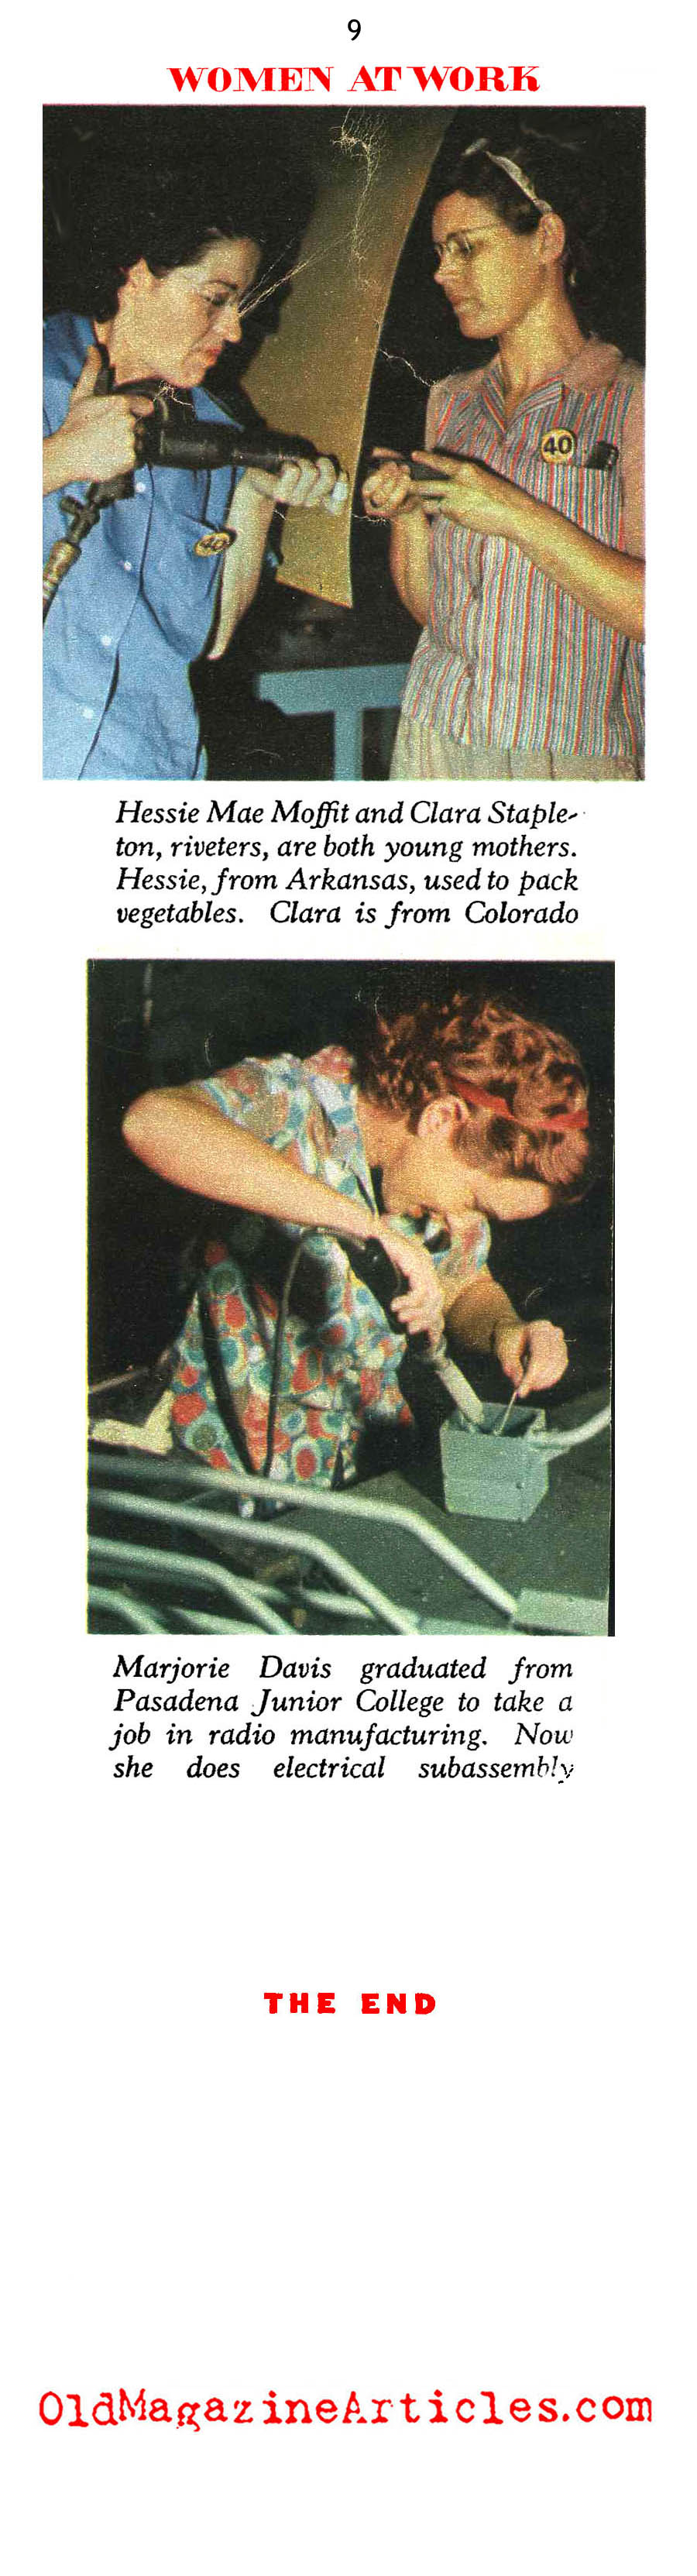 Women Working for the War (The American Magazine, 1942)